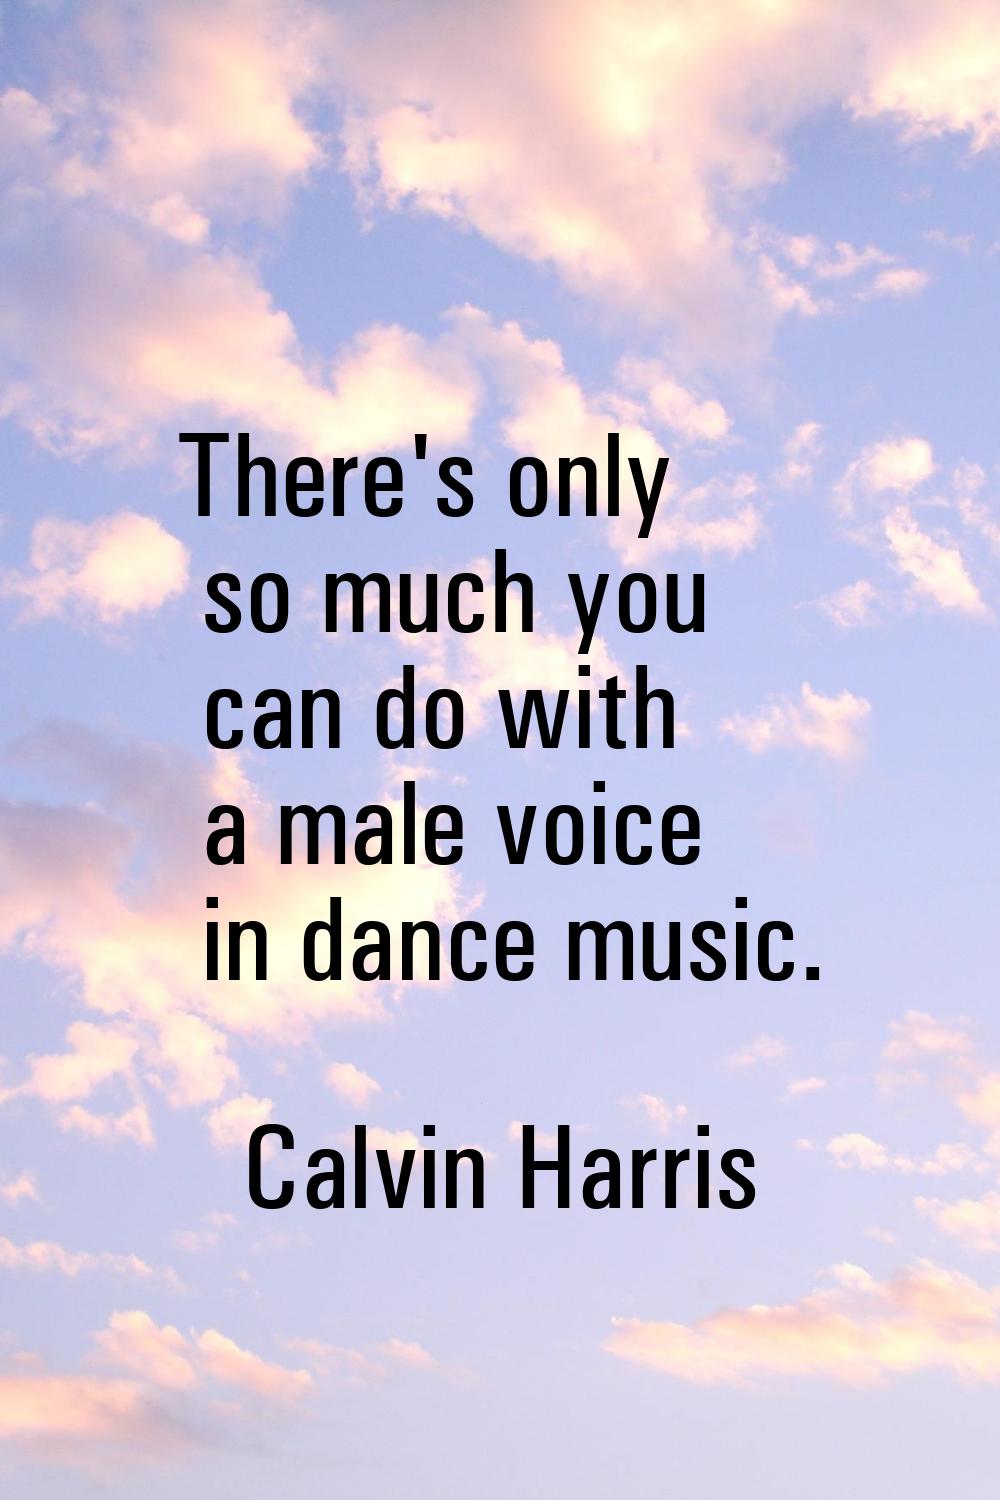 There's only so much you can do with a male voice in dance music.